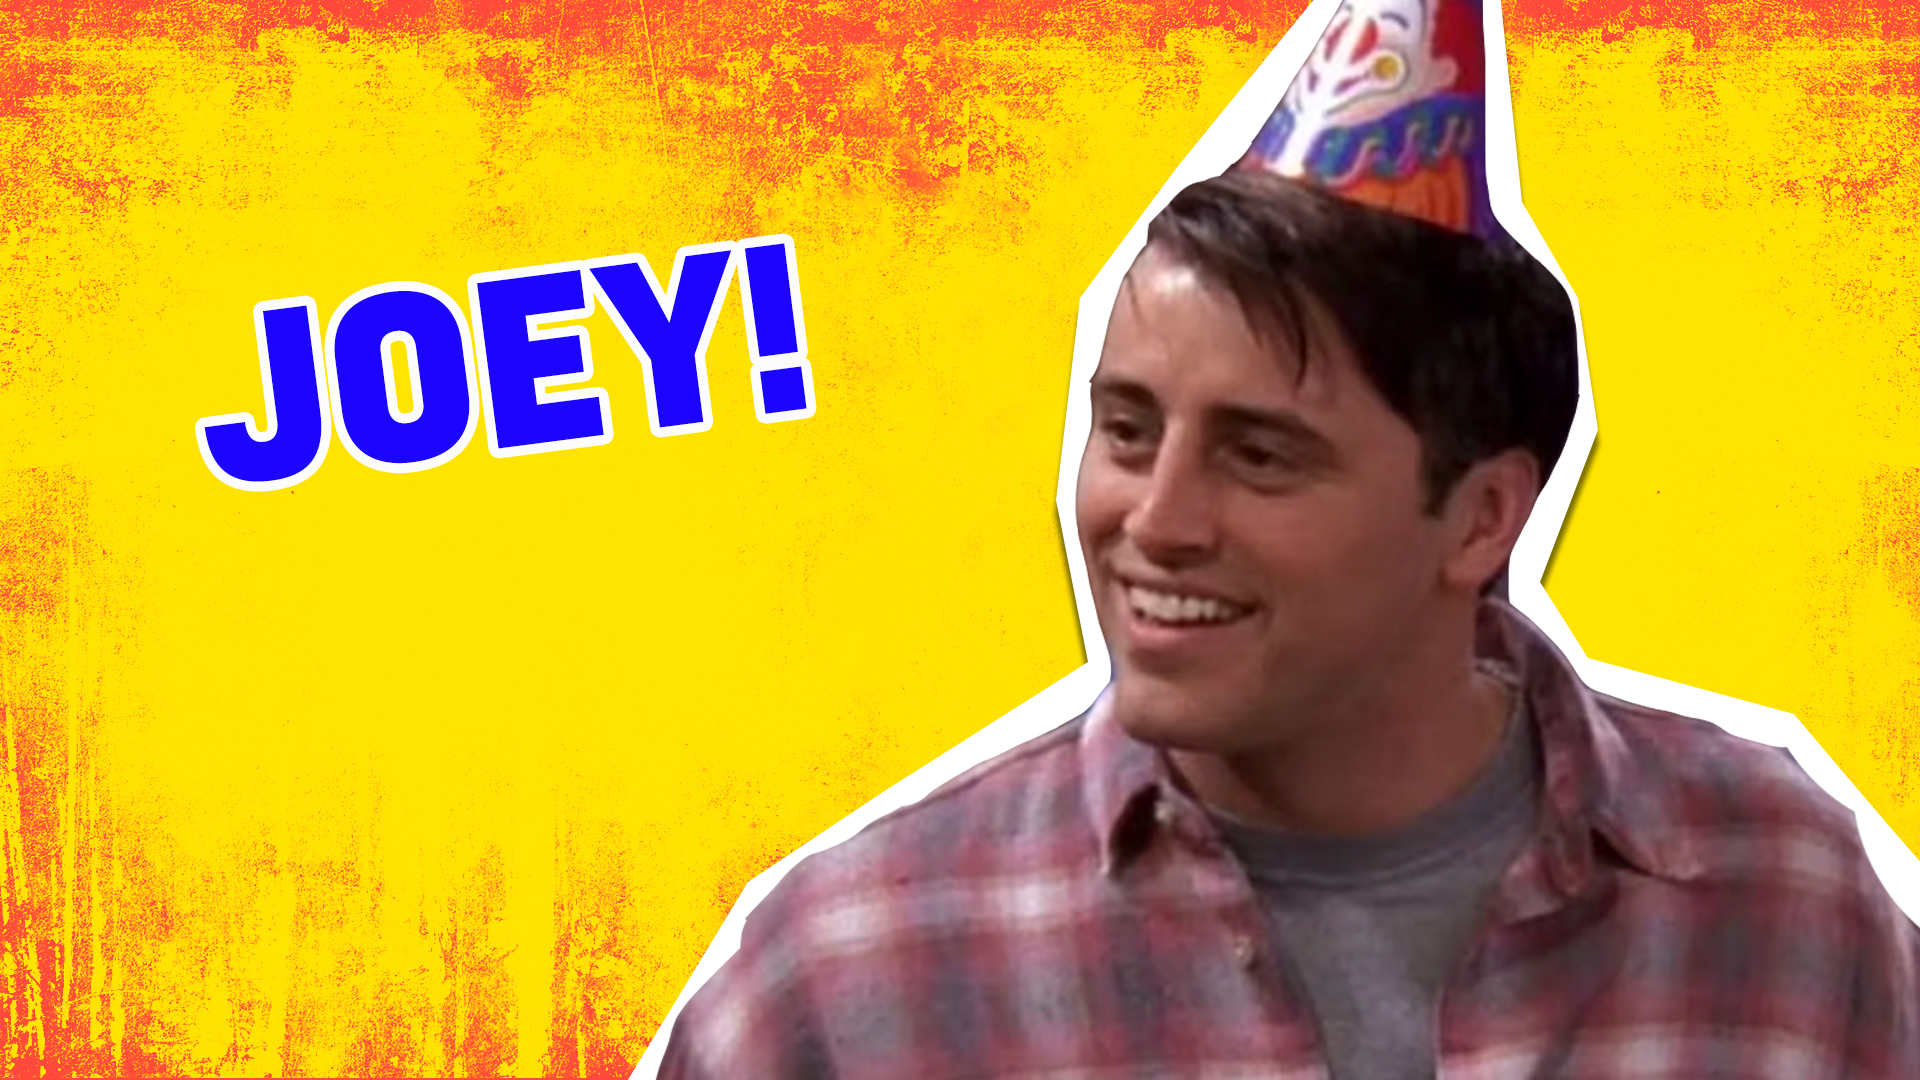 You're Joey! You're fun, laidback and everyone loves to hang out with you! You're not as book smart as some people, but you've got a unique view on the world and that's what makes you special!